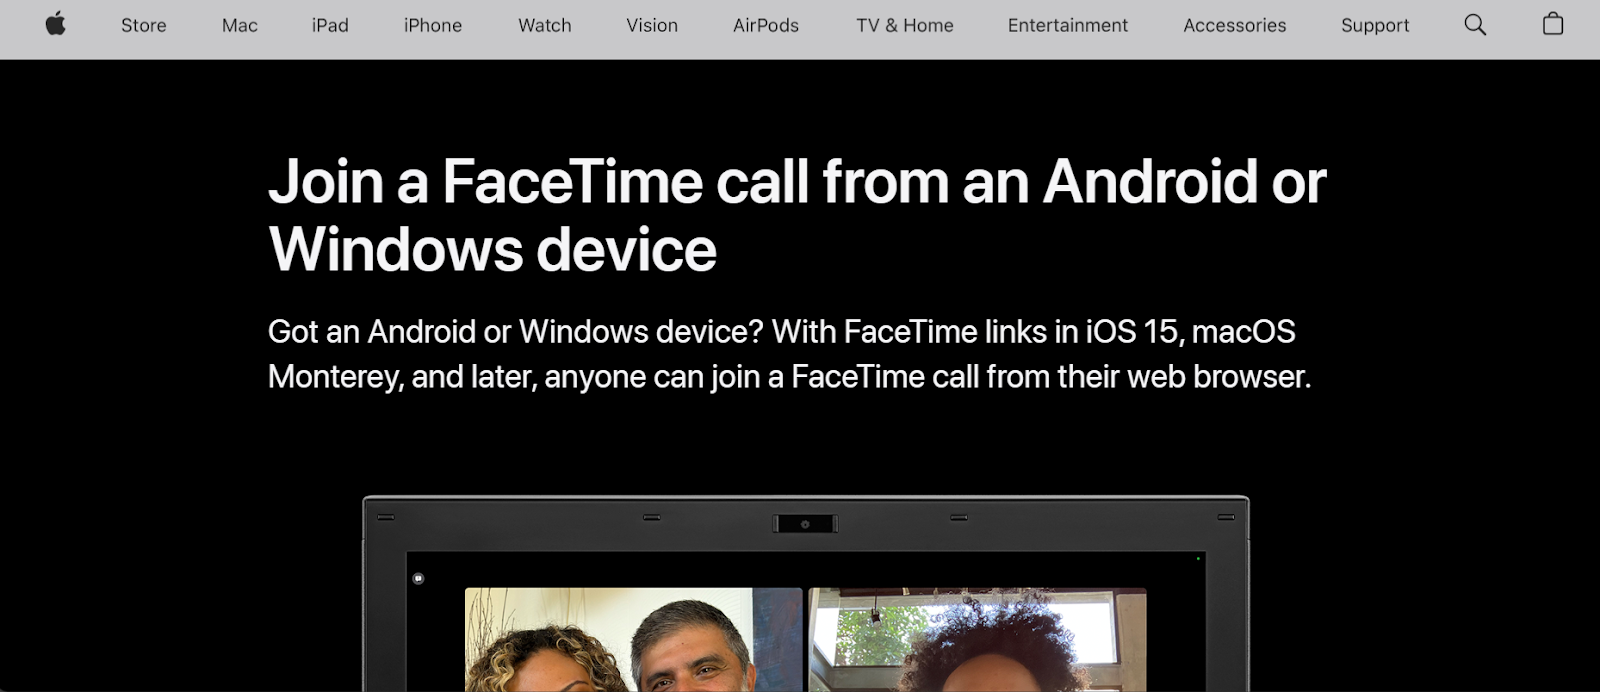 Facetime website snapshot highlighting the services it offers.